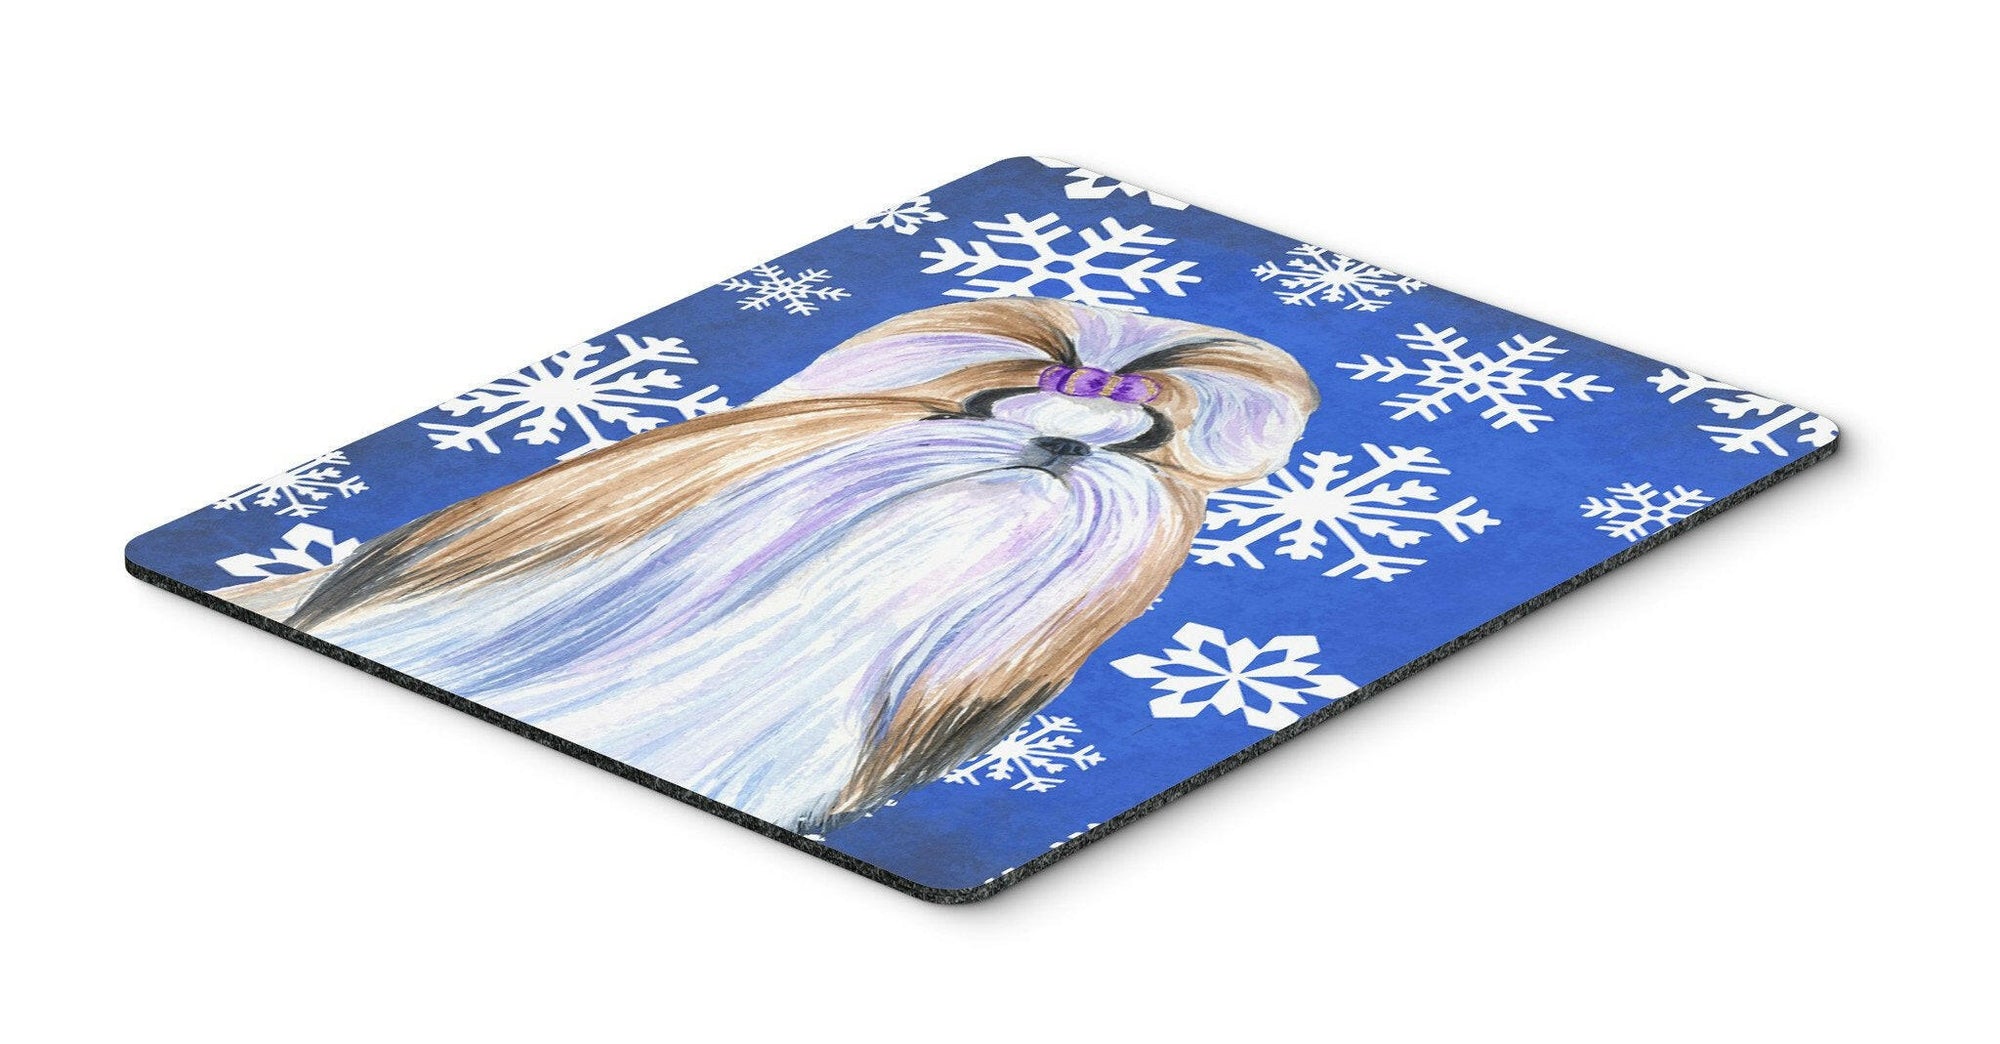 Shih Tzu Winter Snowflakes Holiday Mouse Pad, Hot Pad or Trivet by Caroline's Treasures